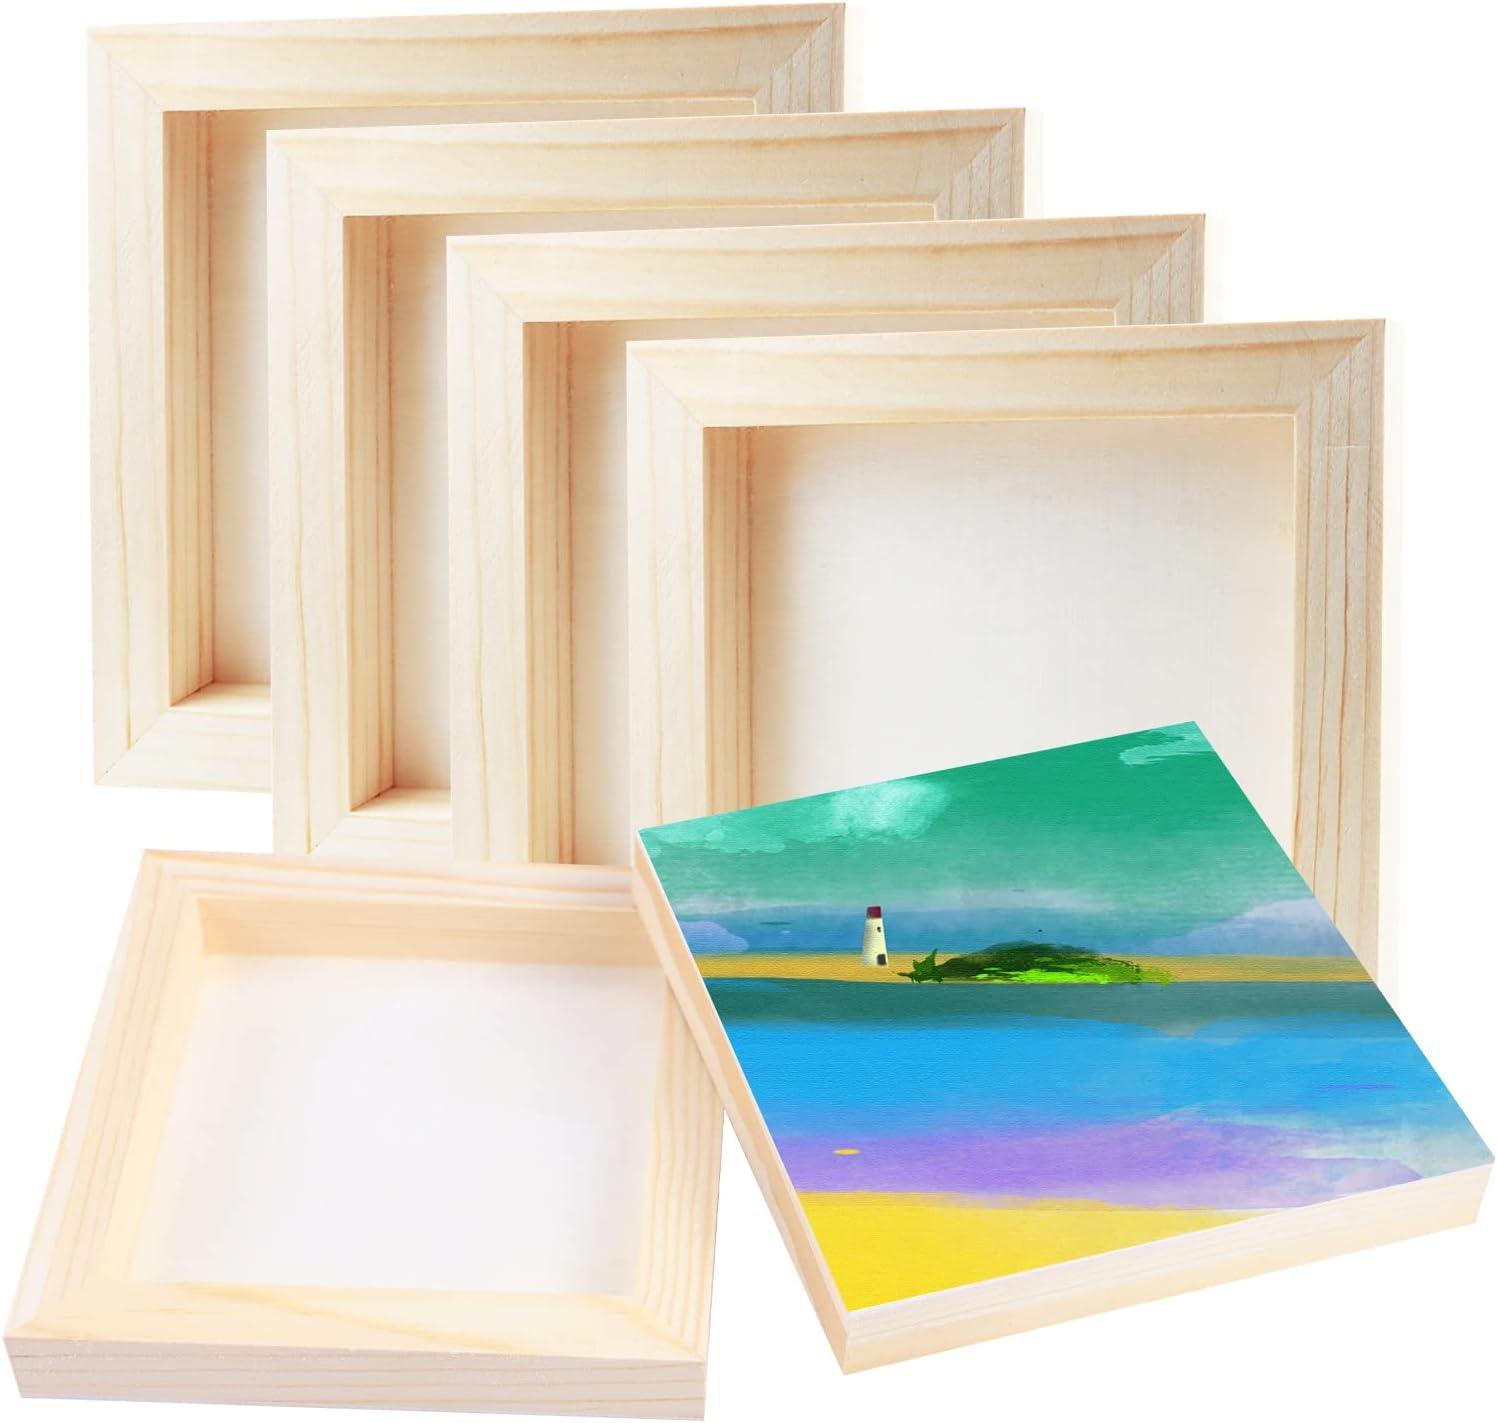 FSWCCK 10 Pcs 6x6 Wood Panel Boards Unfinished Wood Canvas Wooden for Crafts  Painting Canvas DIY Art Projects Pouring Arts Use with Oils Acrylics